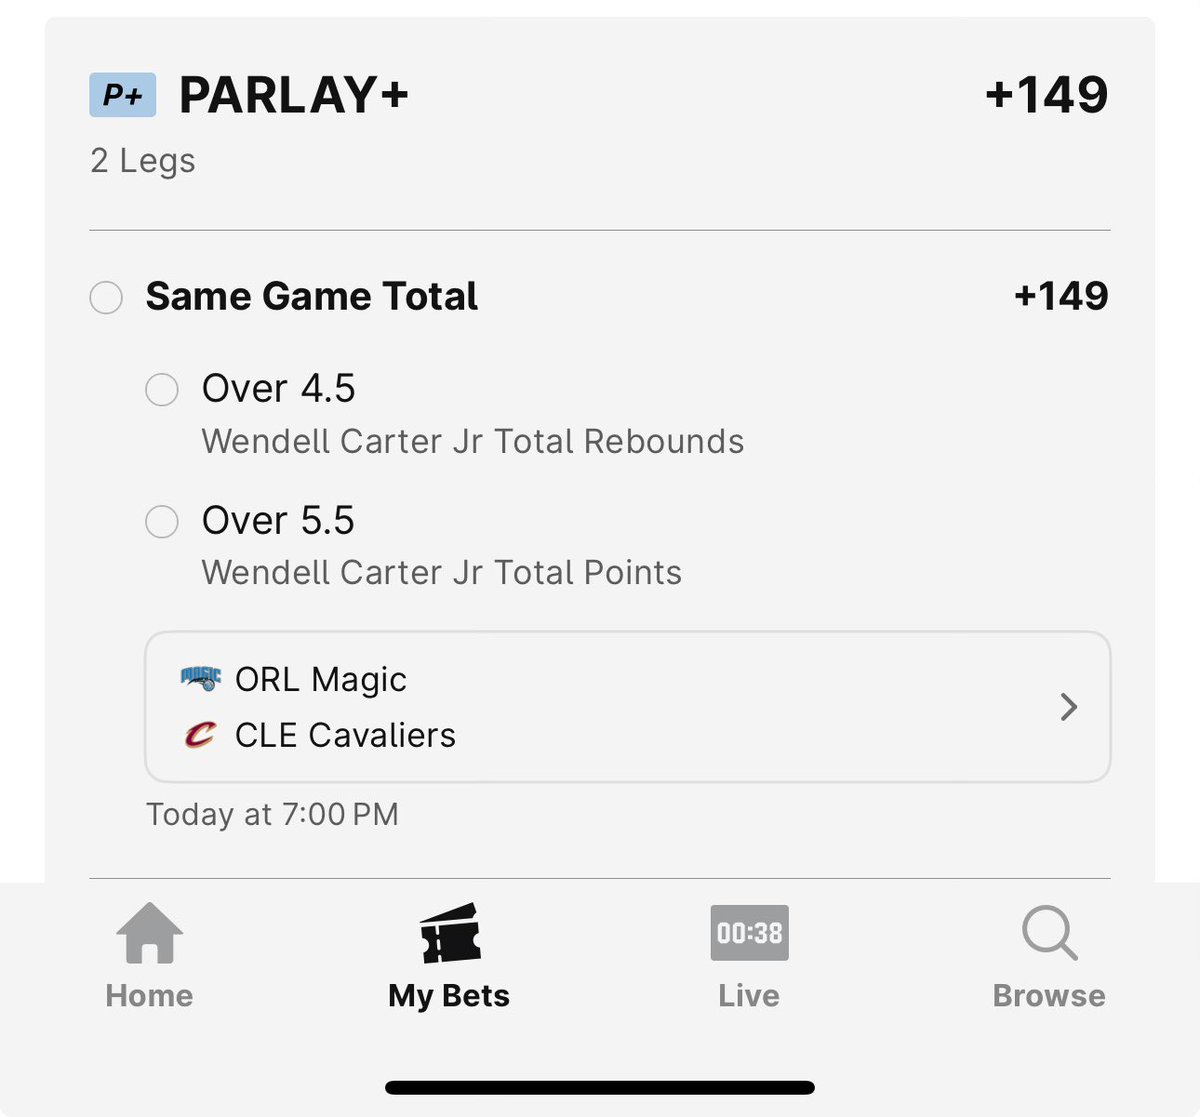 This is a coaching adjustment I think the Magic make as they got dominated on the Boards 54-40. Wendell played well below his average minutes last game and hurt them because of it.  

Go to betalytics.com
Code:CAVEMAN
25% off

#GamblingX #GamblingTwitter #AheadOfTheCurve